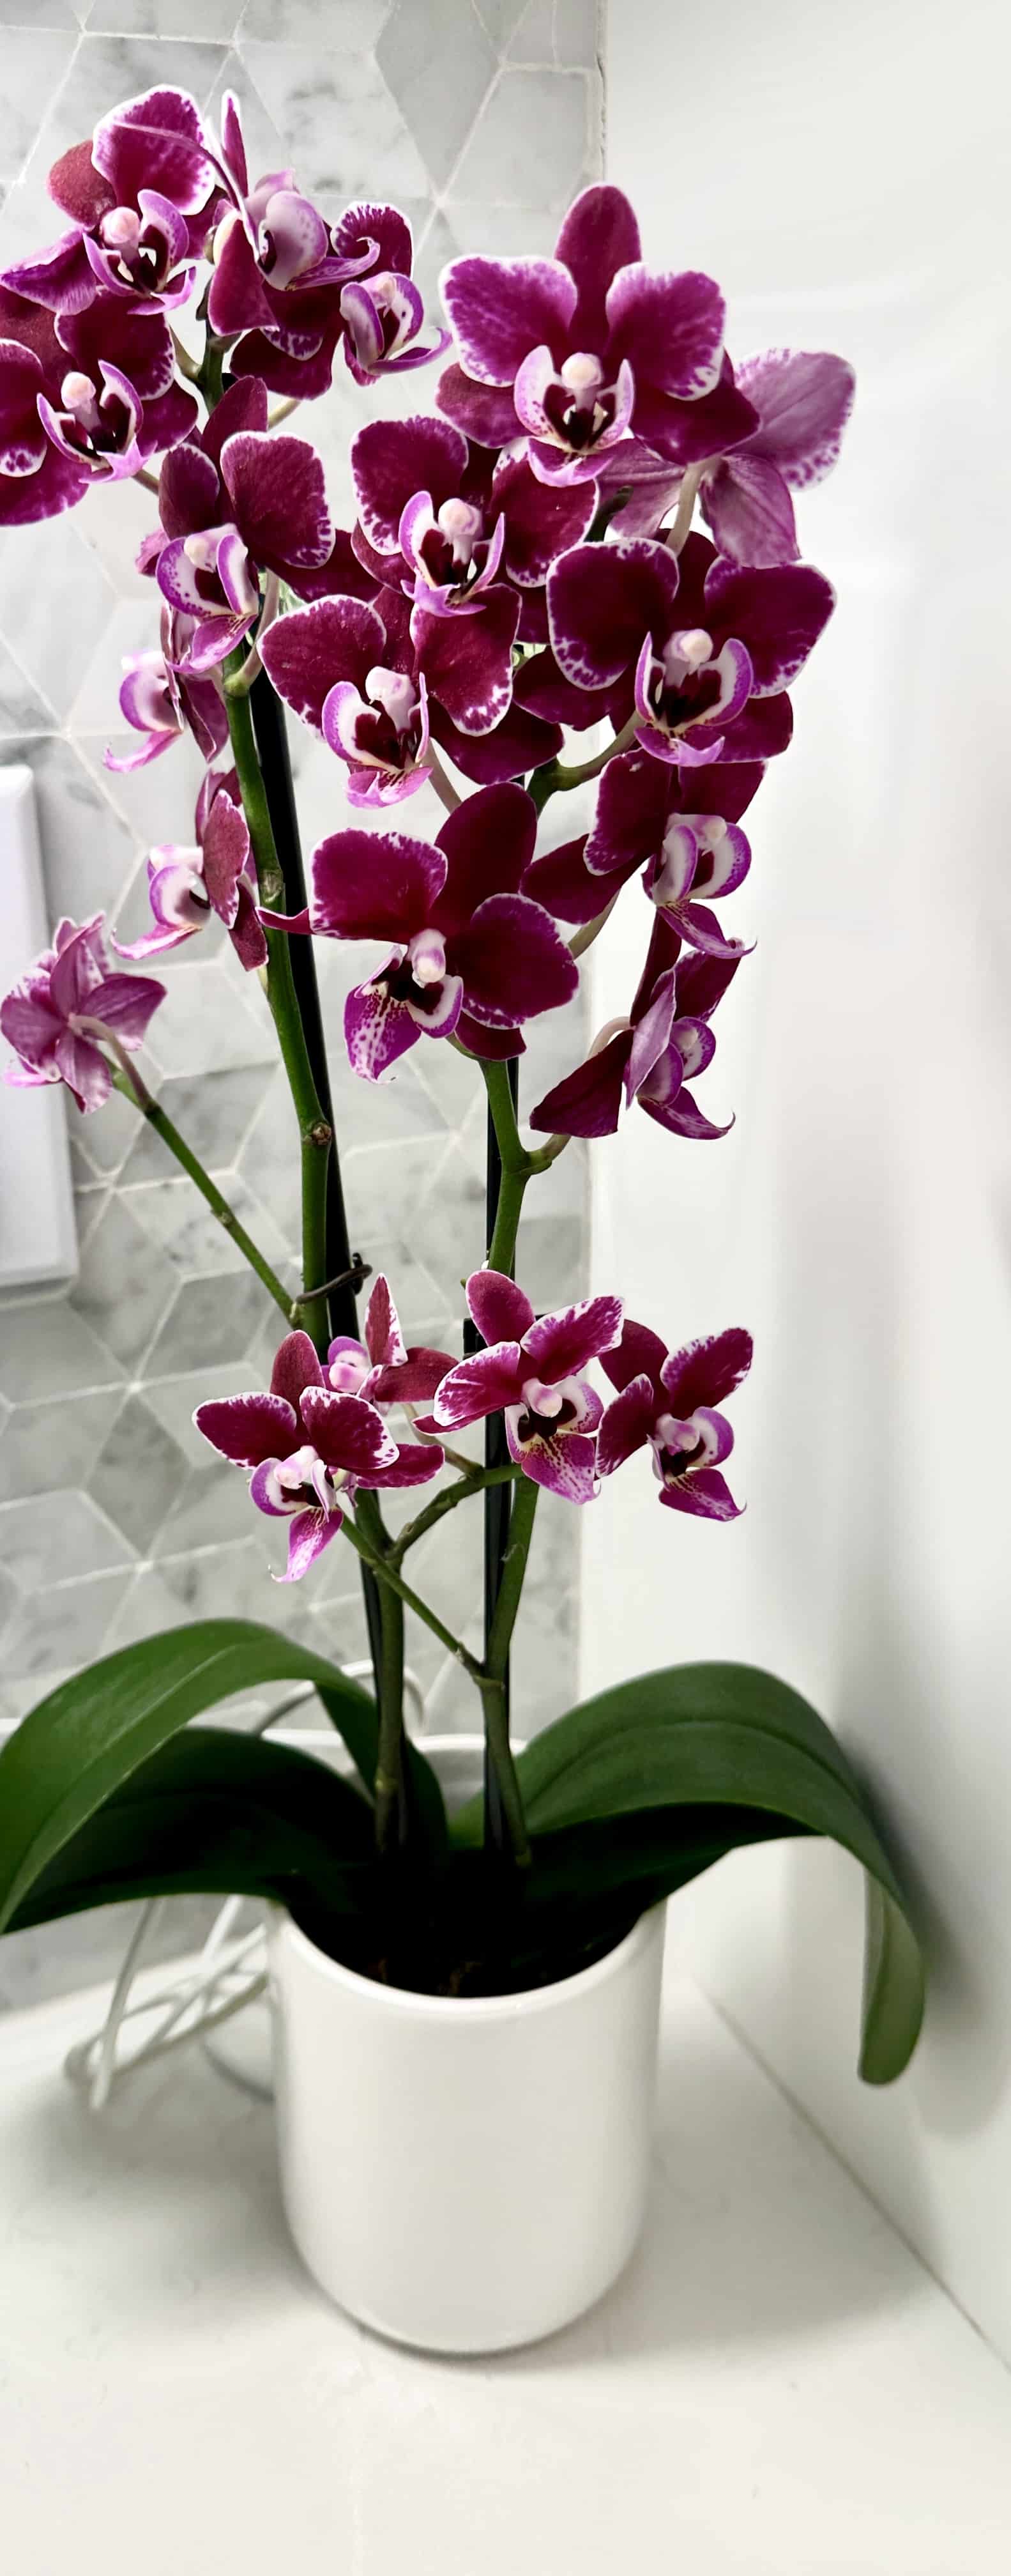 How to Water Orchids: Tips for Beautiful Blooms